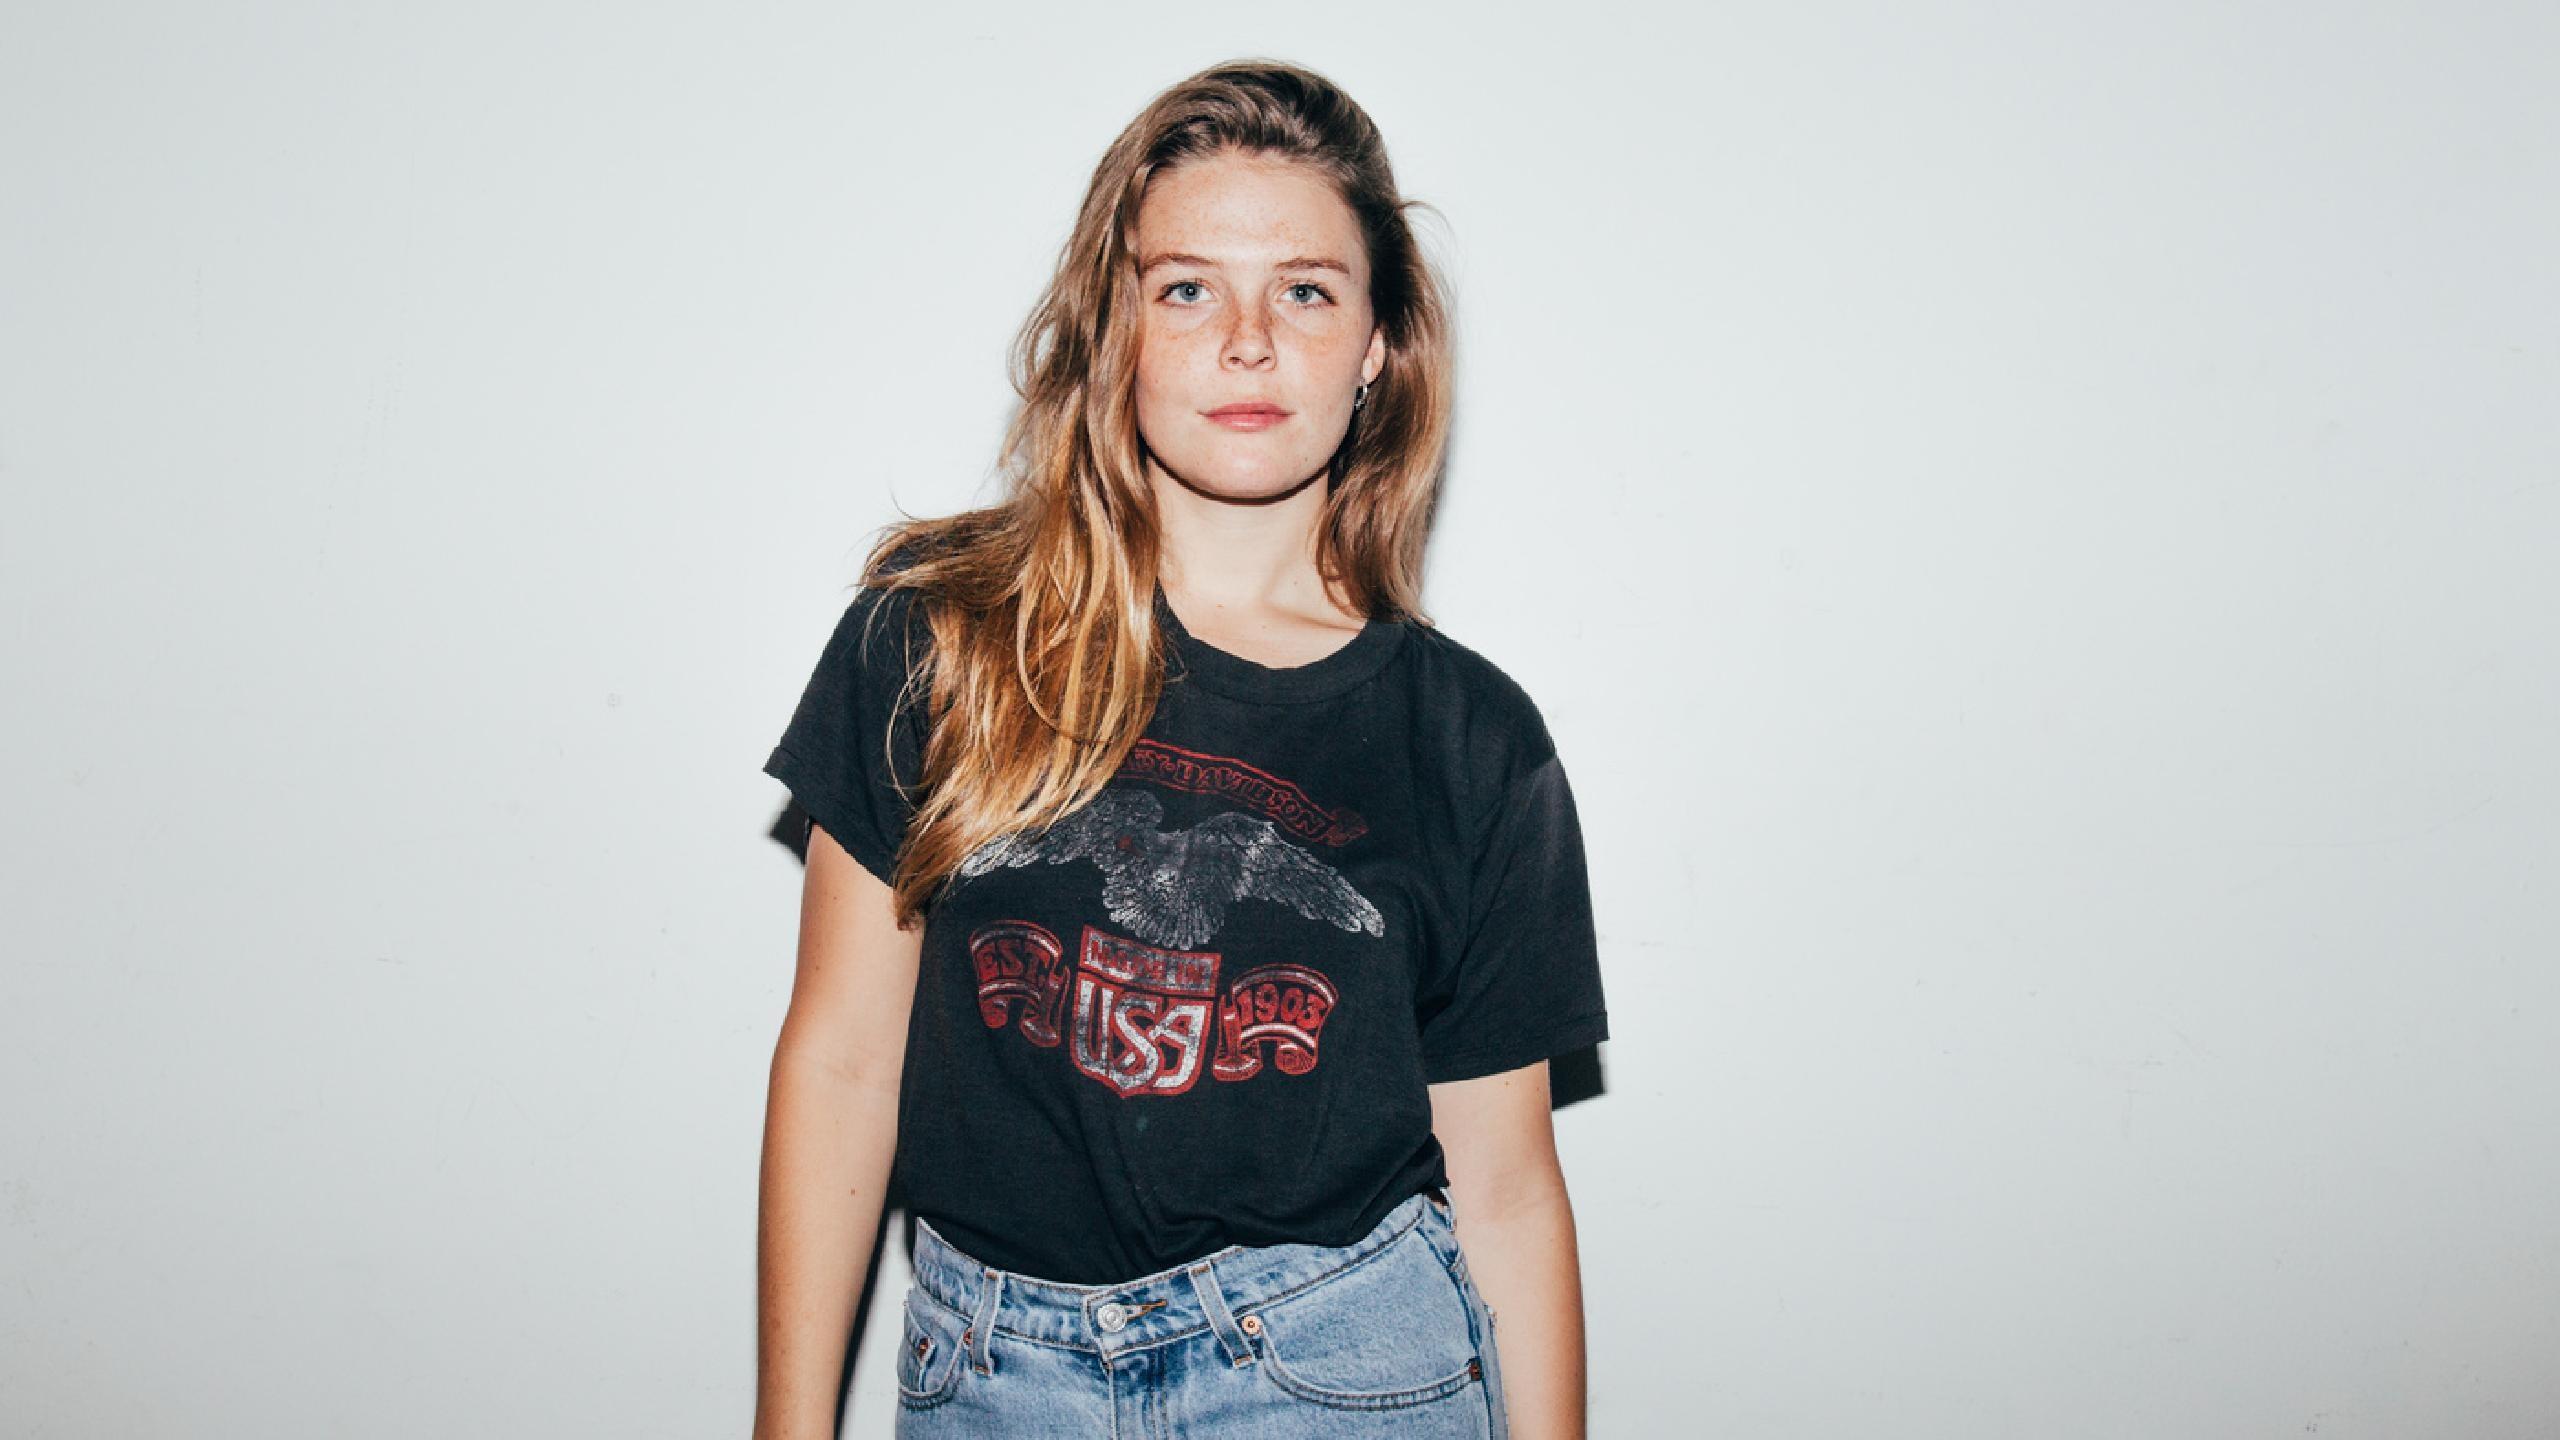 Maggie Rogers, Tour dates 2022, Tickets and concerts, Music experience, 2560x1440 HD Desktop